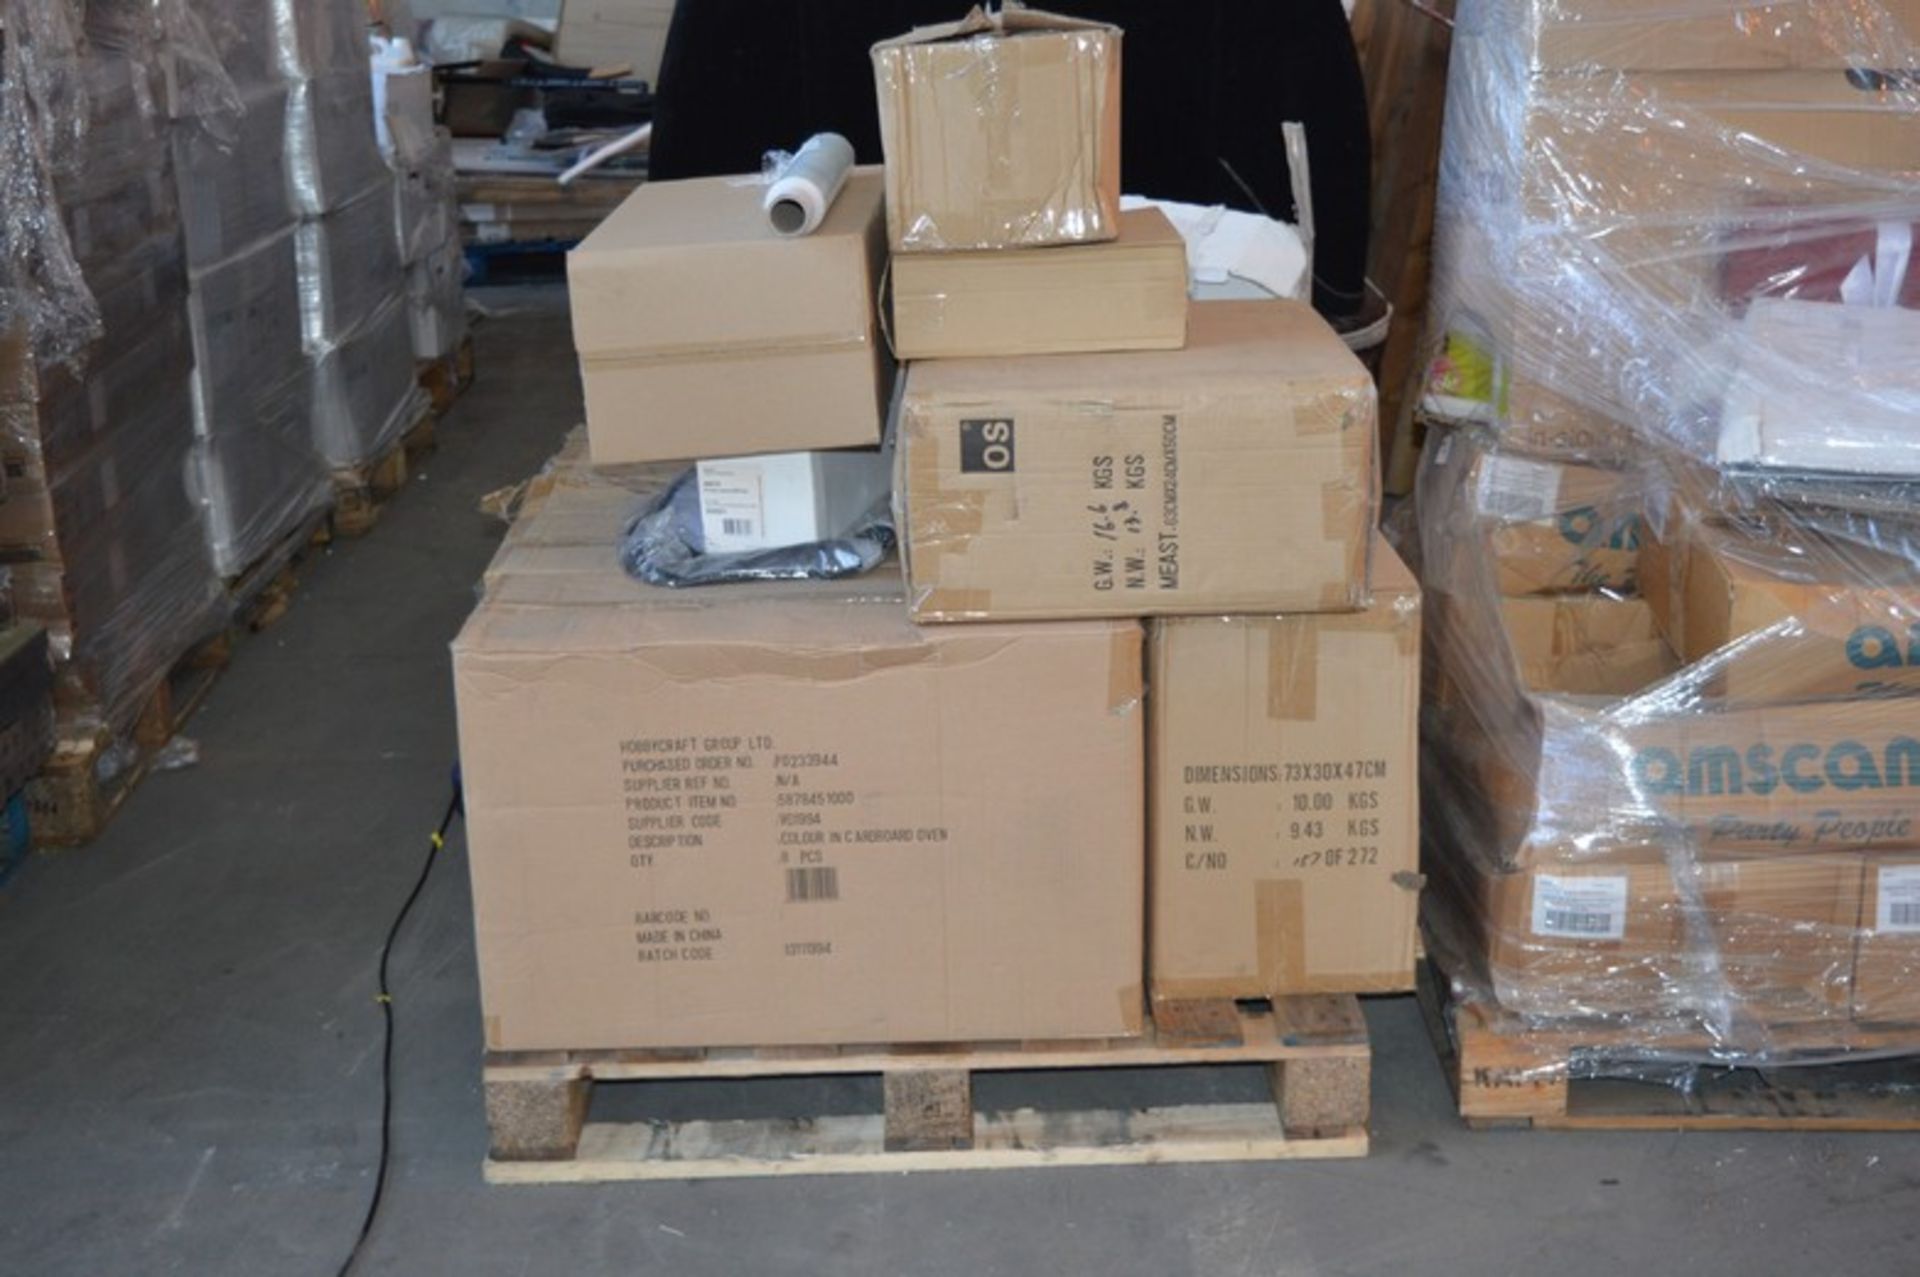 MIXED PALLET- CHRISTMAS BOXS, CARDBOARD OVEN, TONERS, ONE DIRECTION BAG- VIEWING AVAILABLE